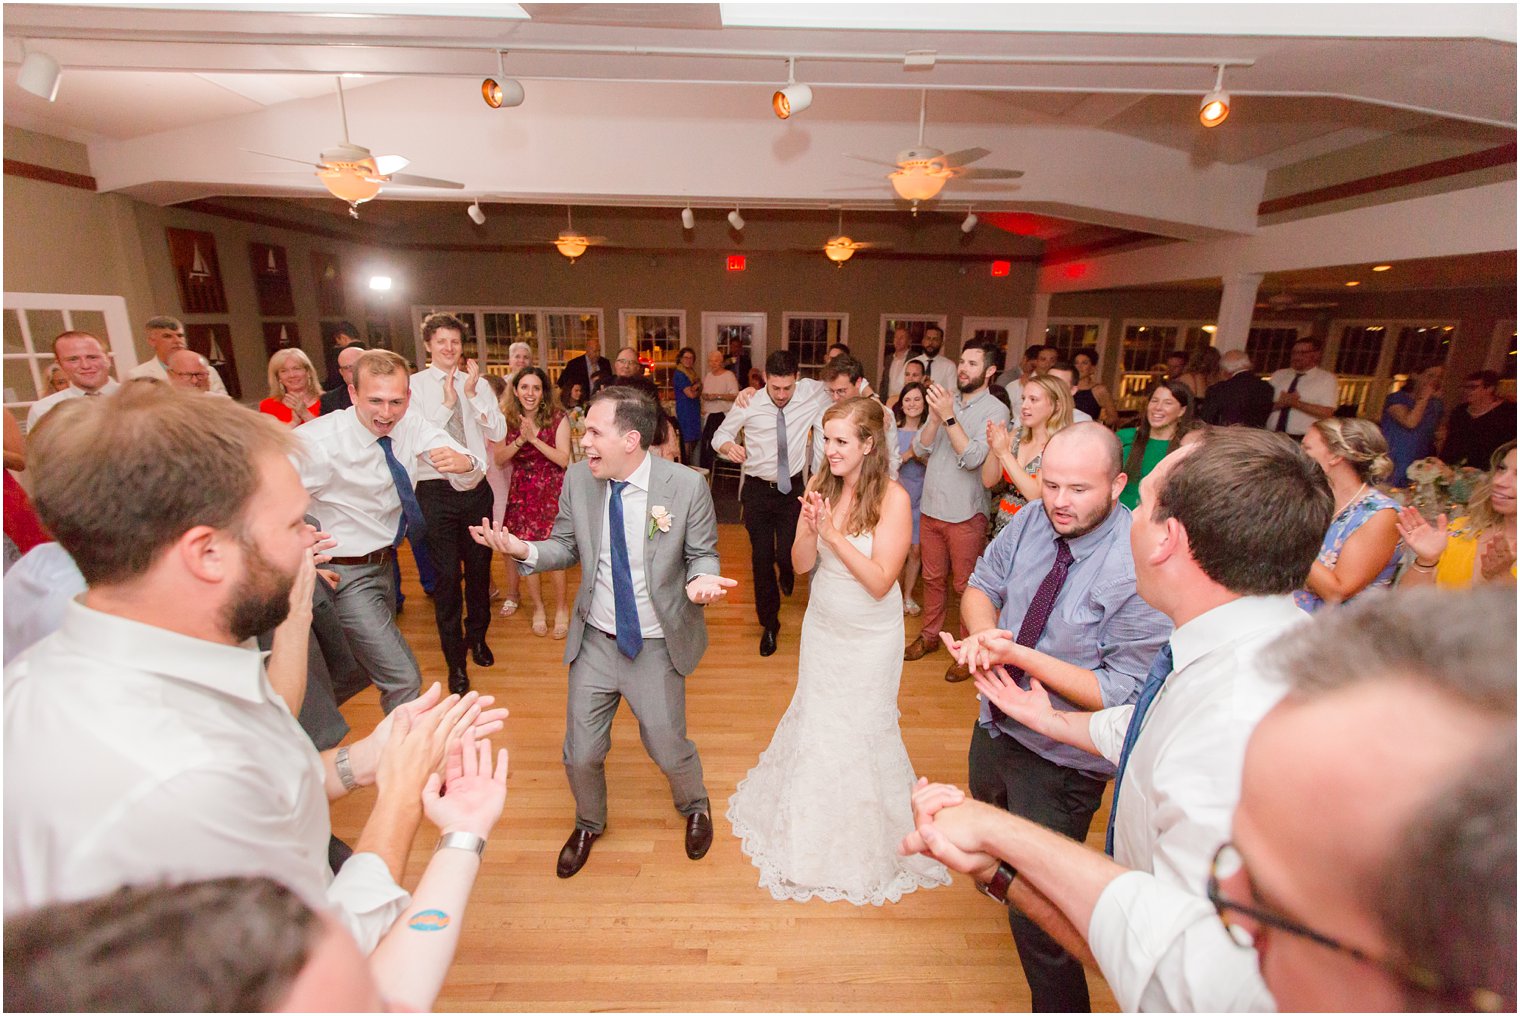 dancing at wedding reception at Brant Beach Yacht Club photographed by Idalia Photography